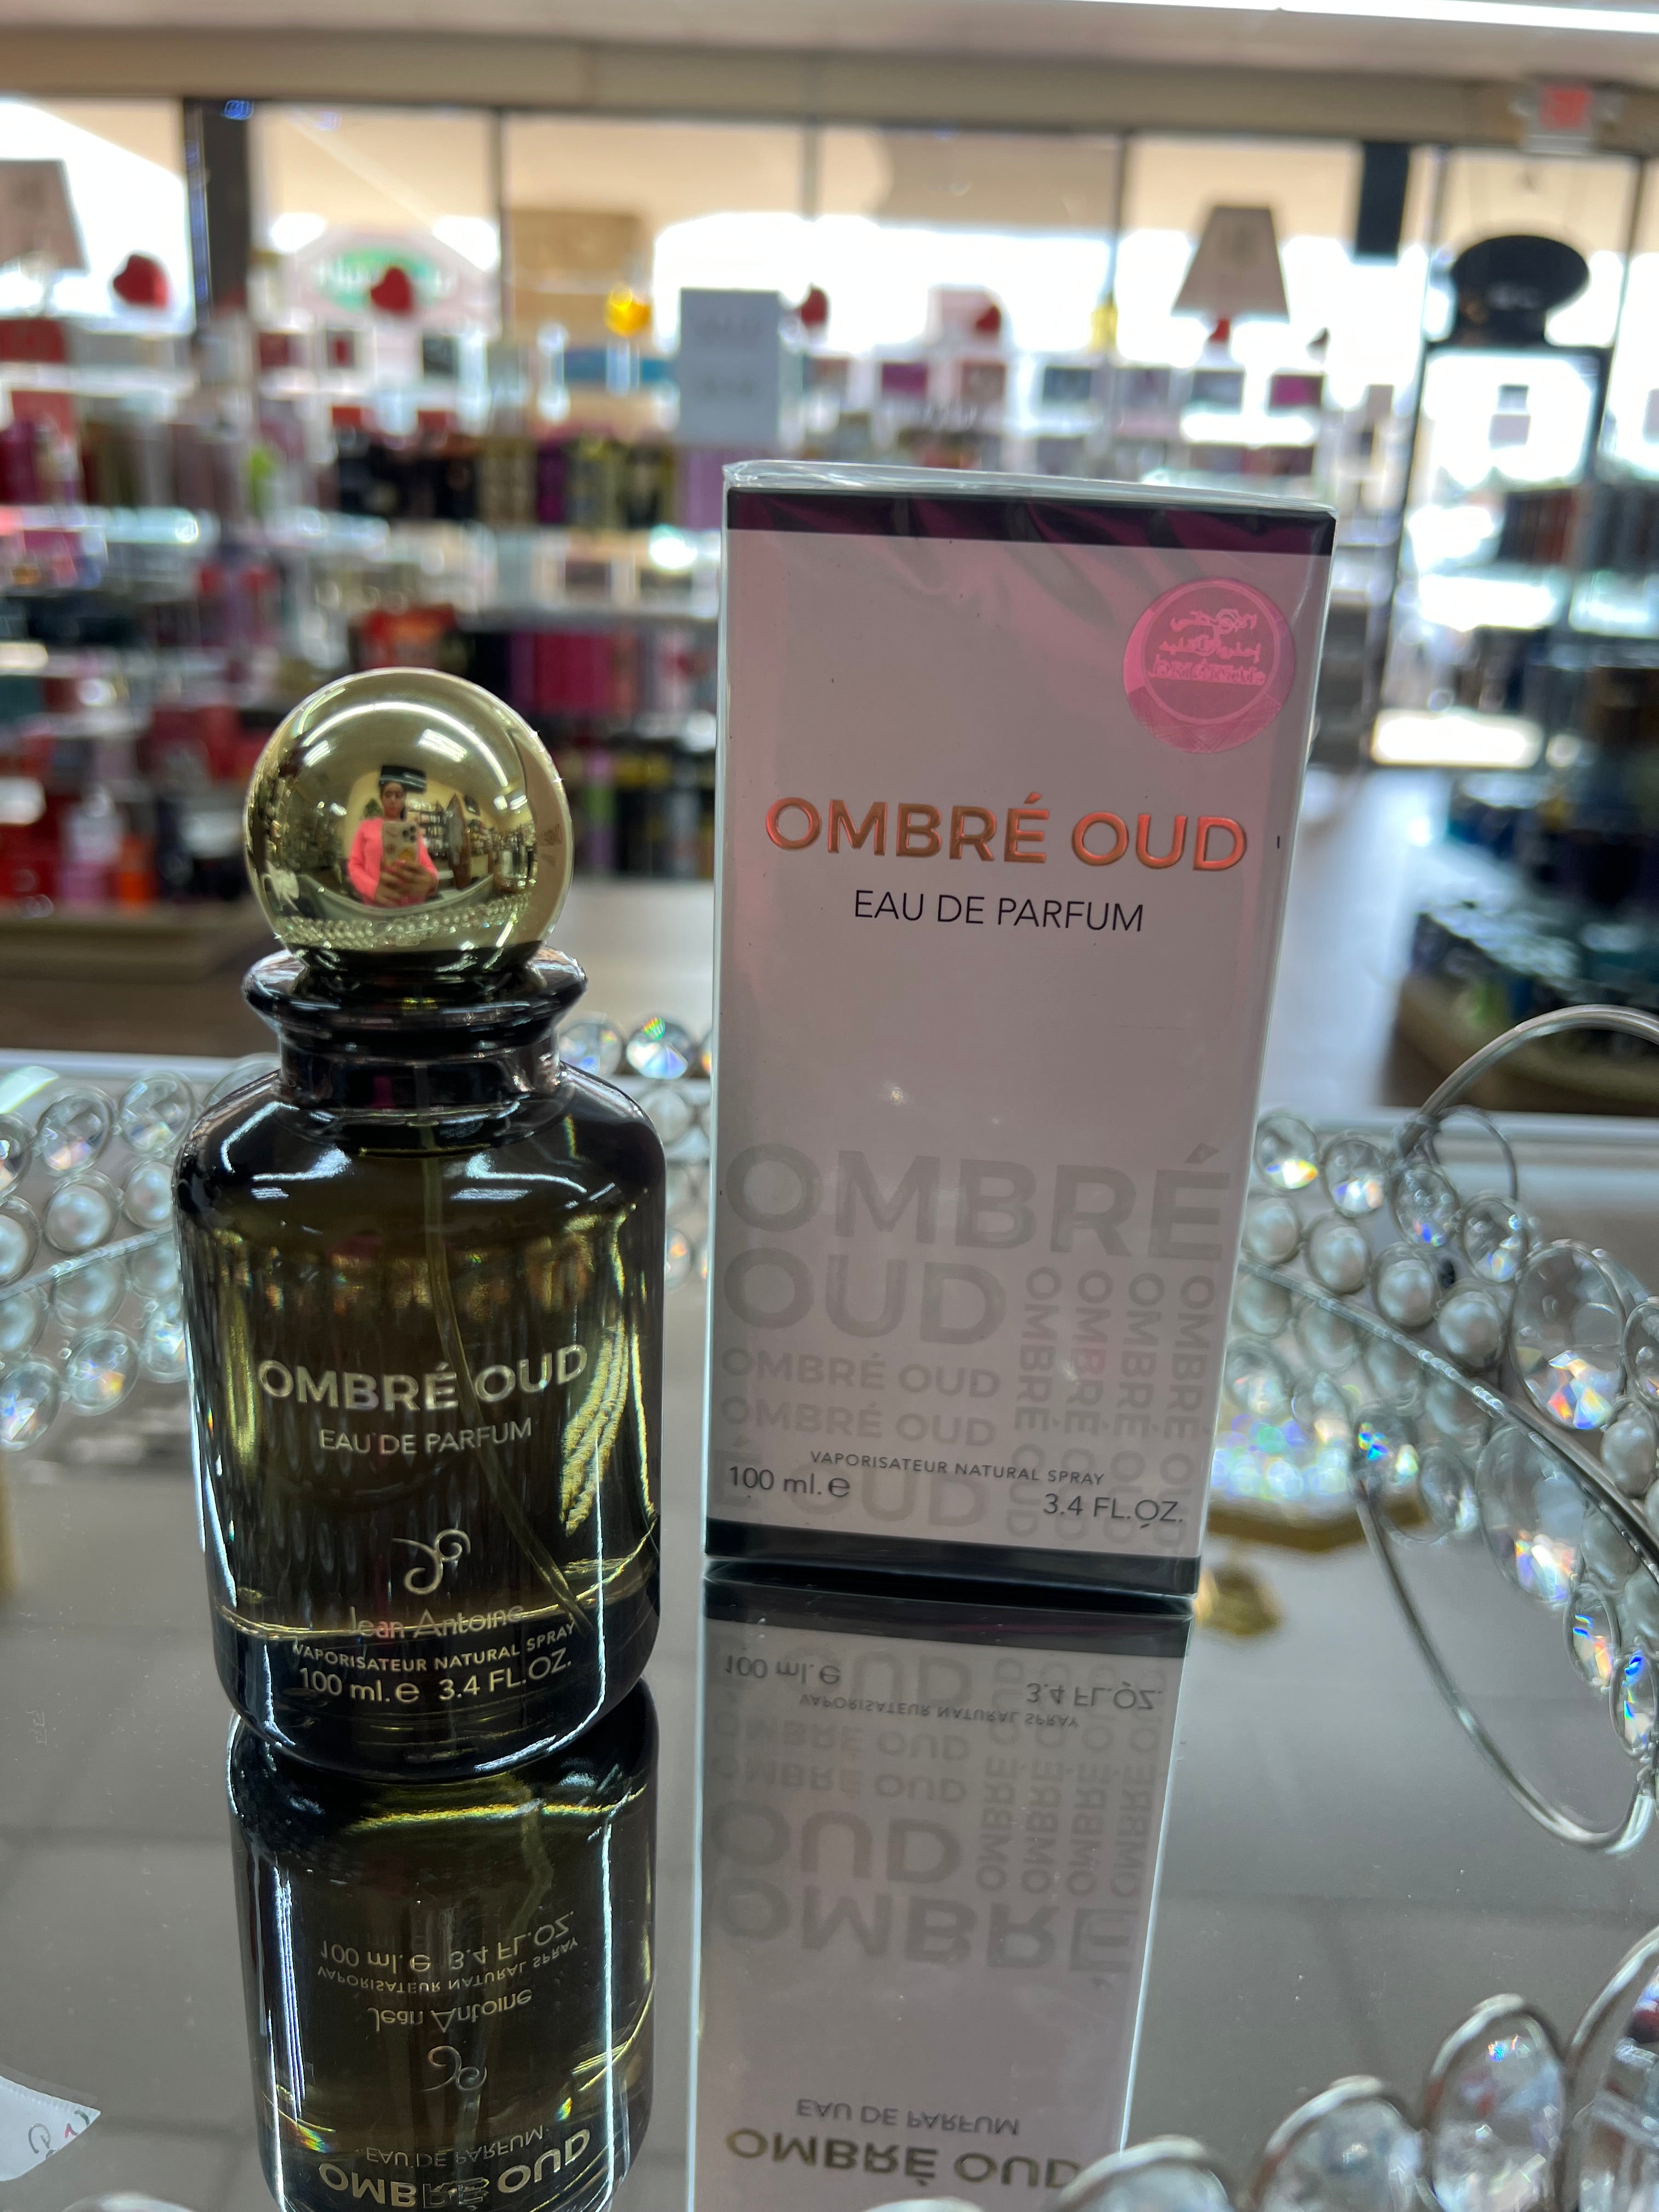 ombre oud